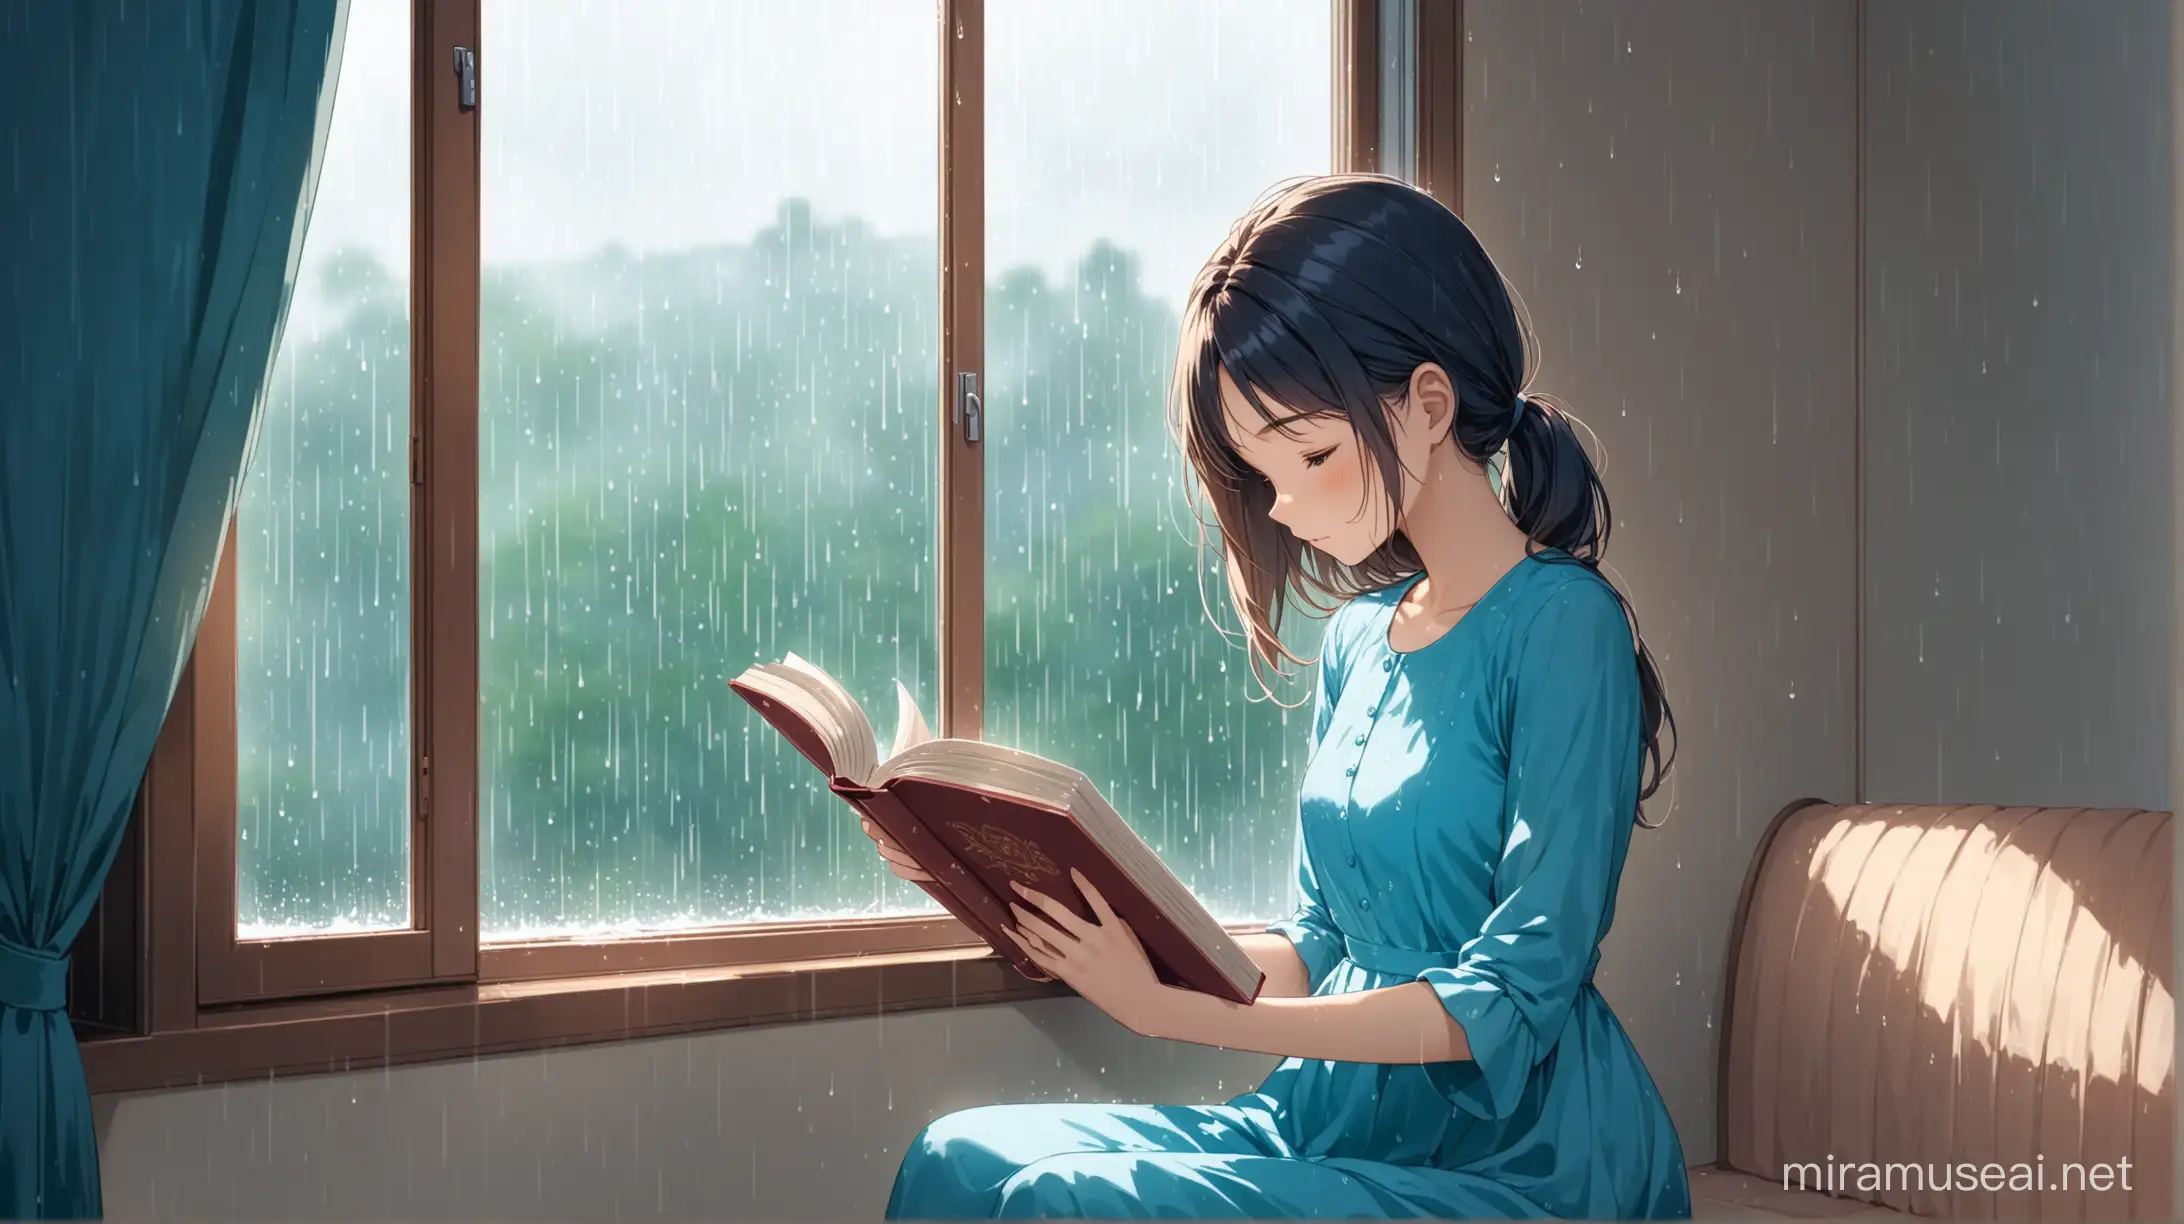 Girl Reading Book by Rainy Window in Blue Dress